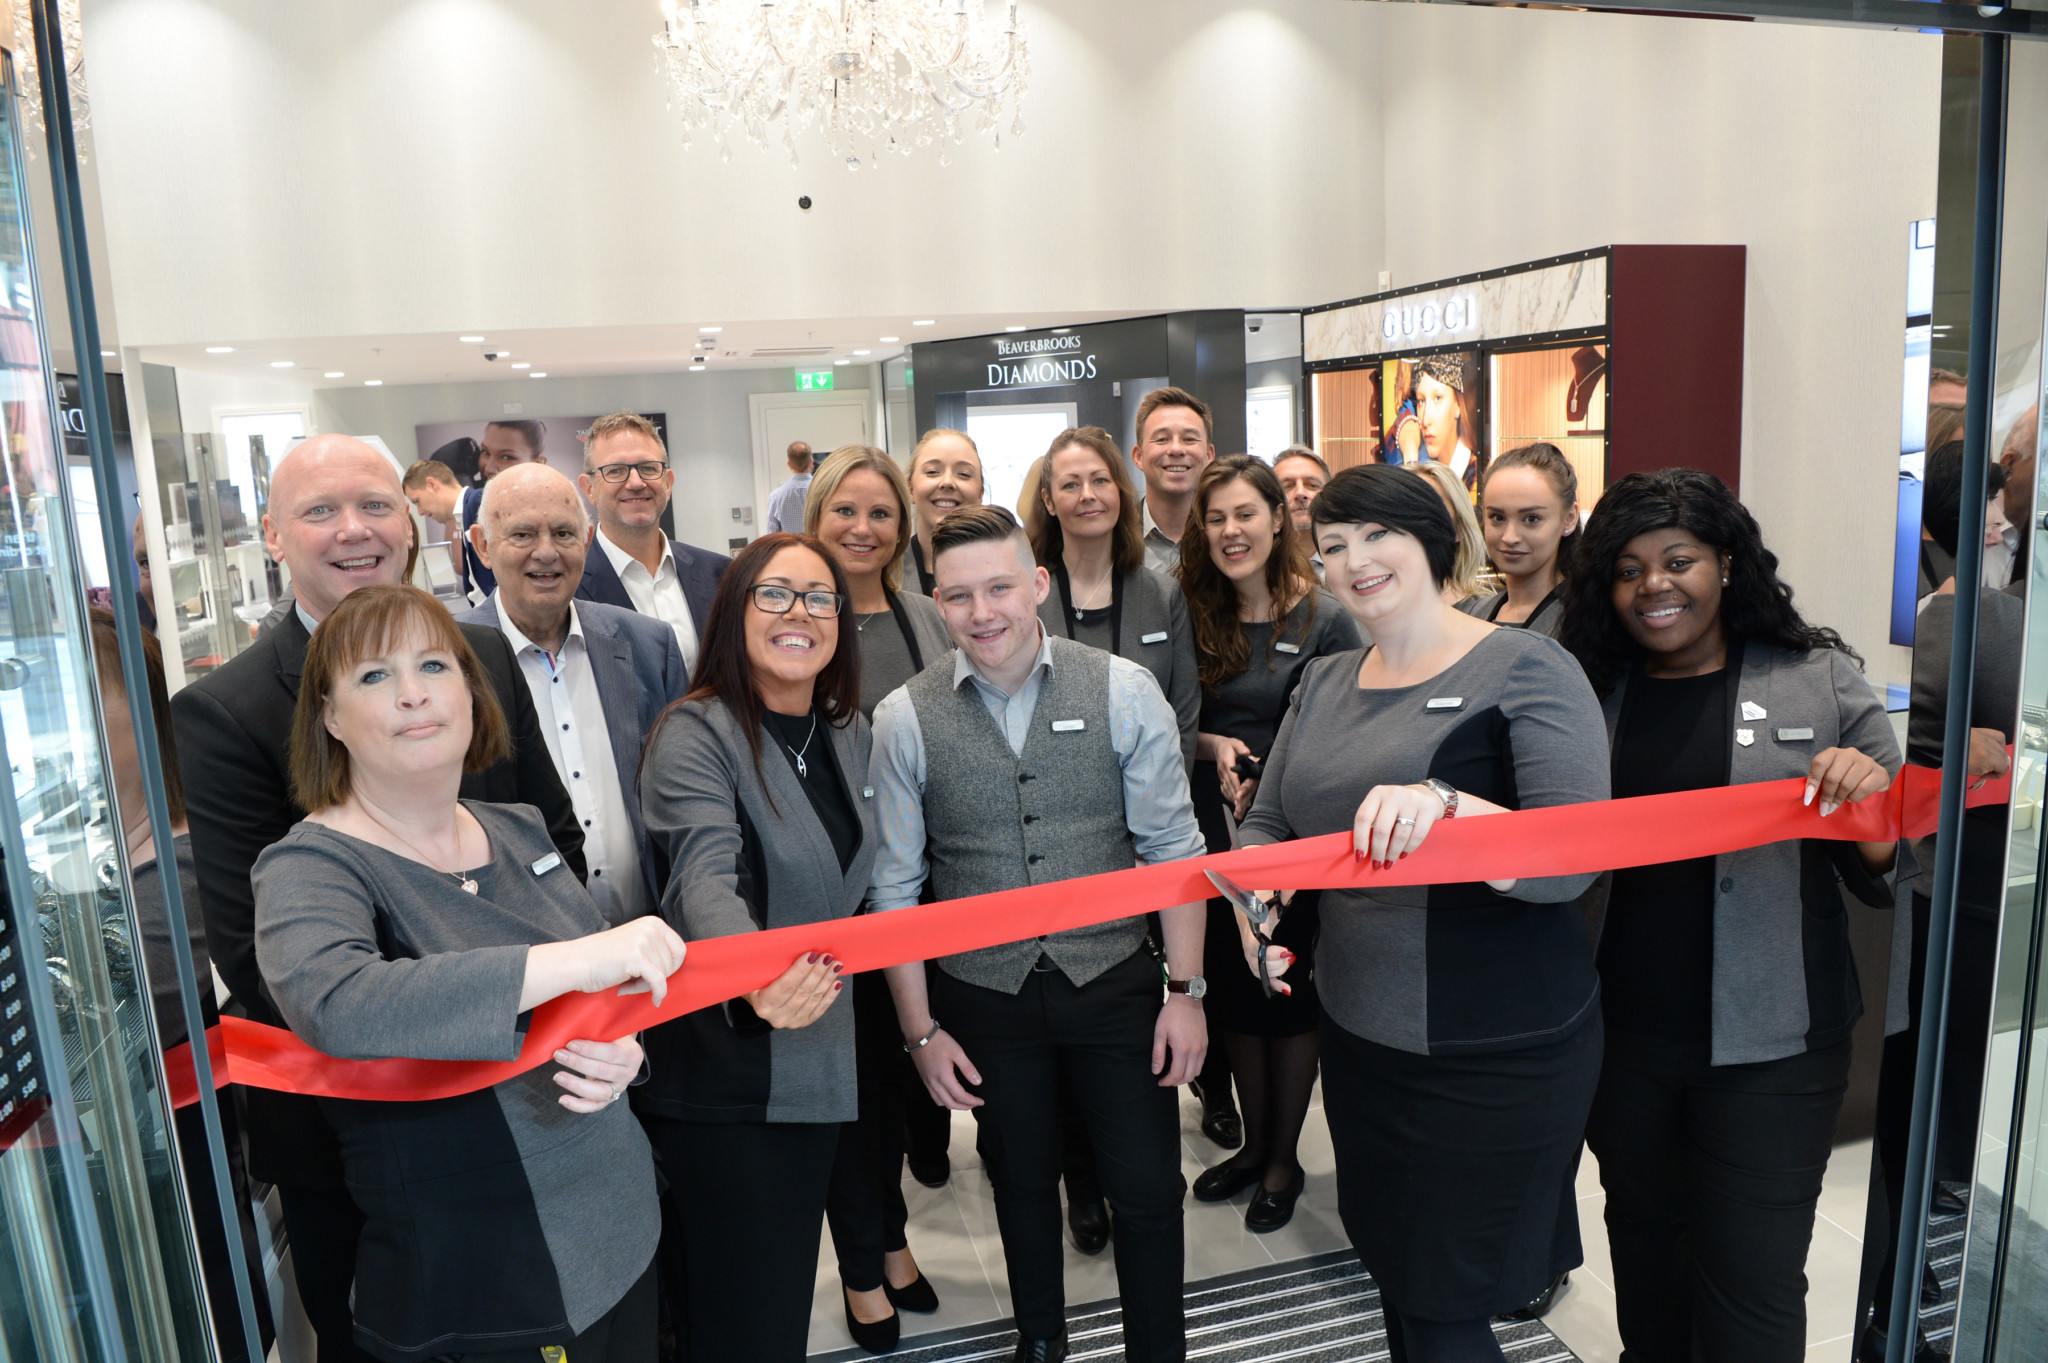 The bracknell store opened as an anchor tenant at the new lexicon shopping centre.